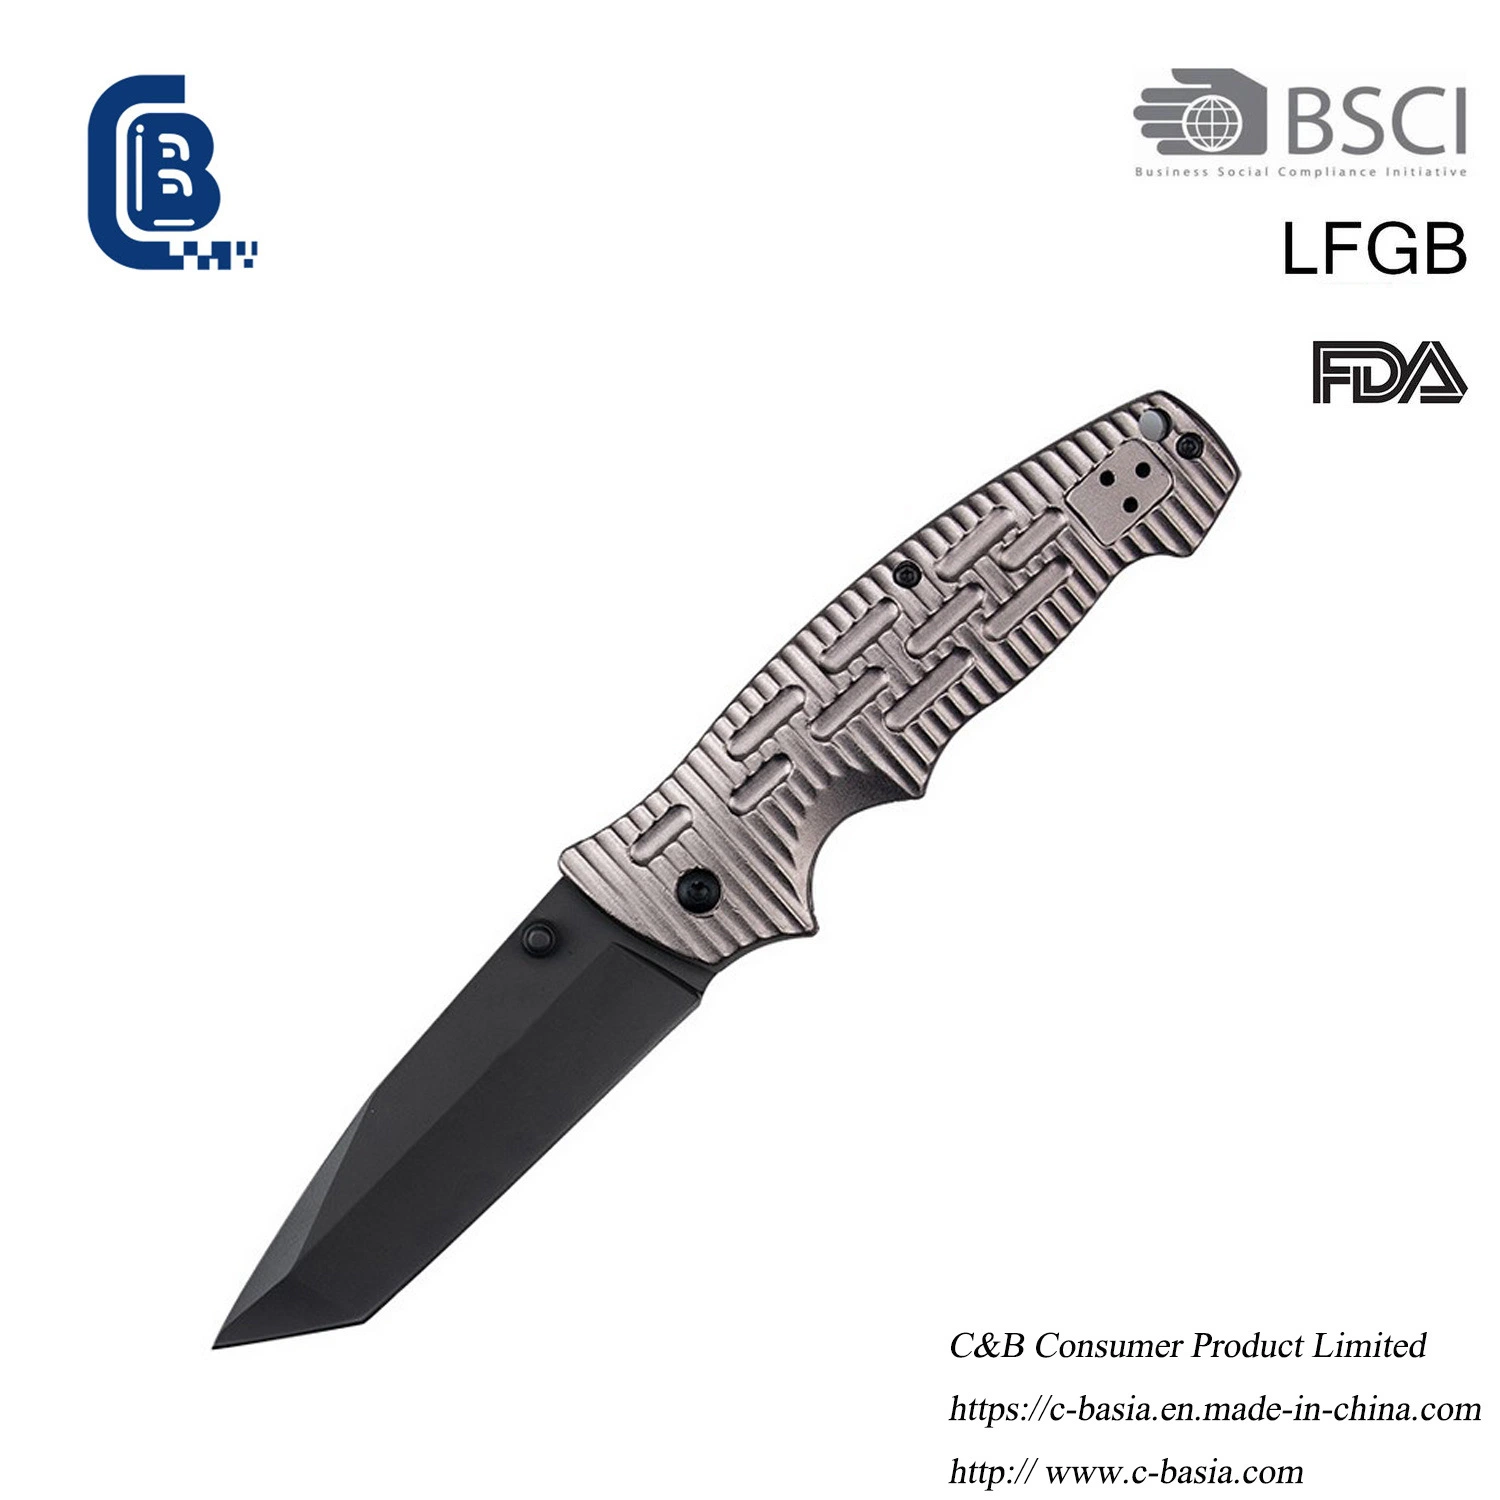 5" Stainless Steel Multifunctional Tactical Survival Camping Combat Knife Hunting Hand Tools Pocket Outdoor Knife